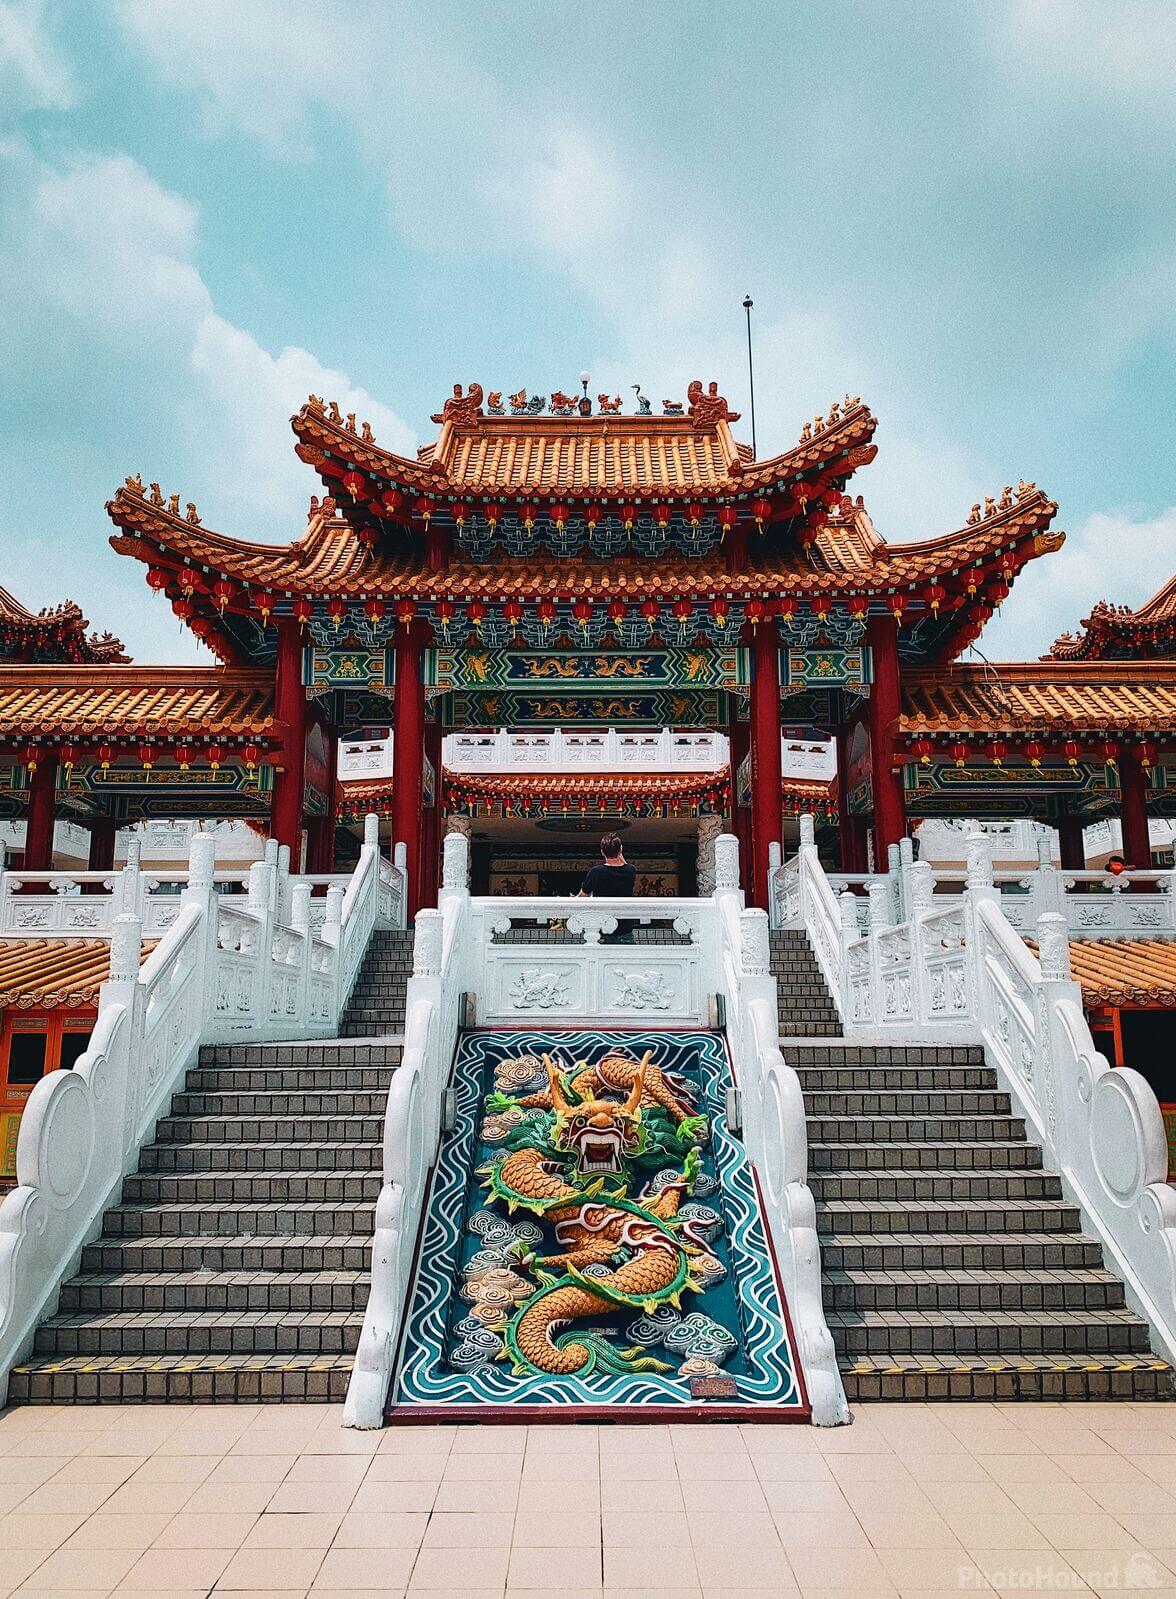 Image of Thean Hou Temple by Team PhotoHound